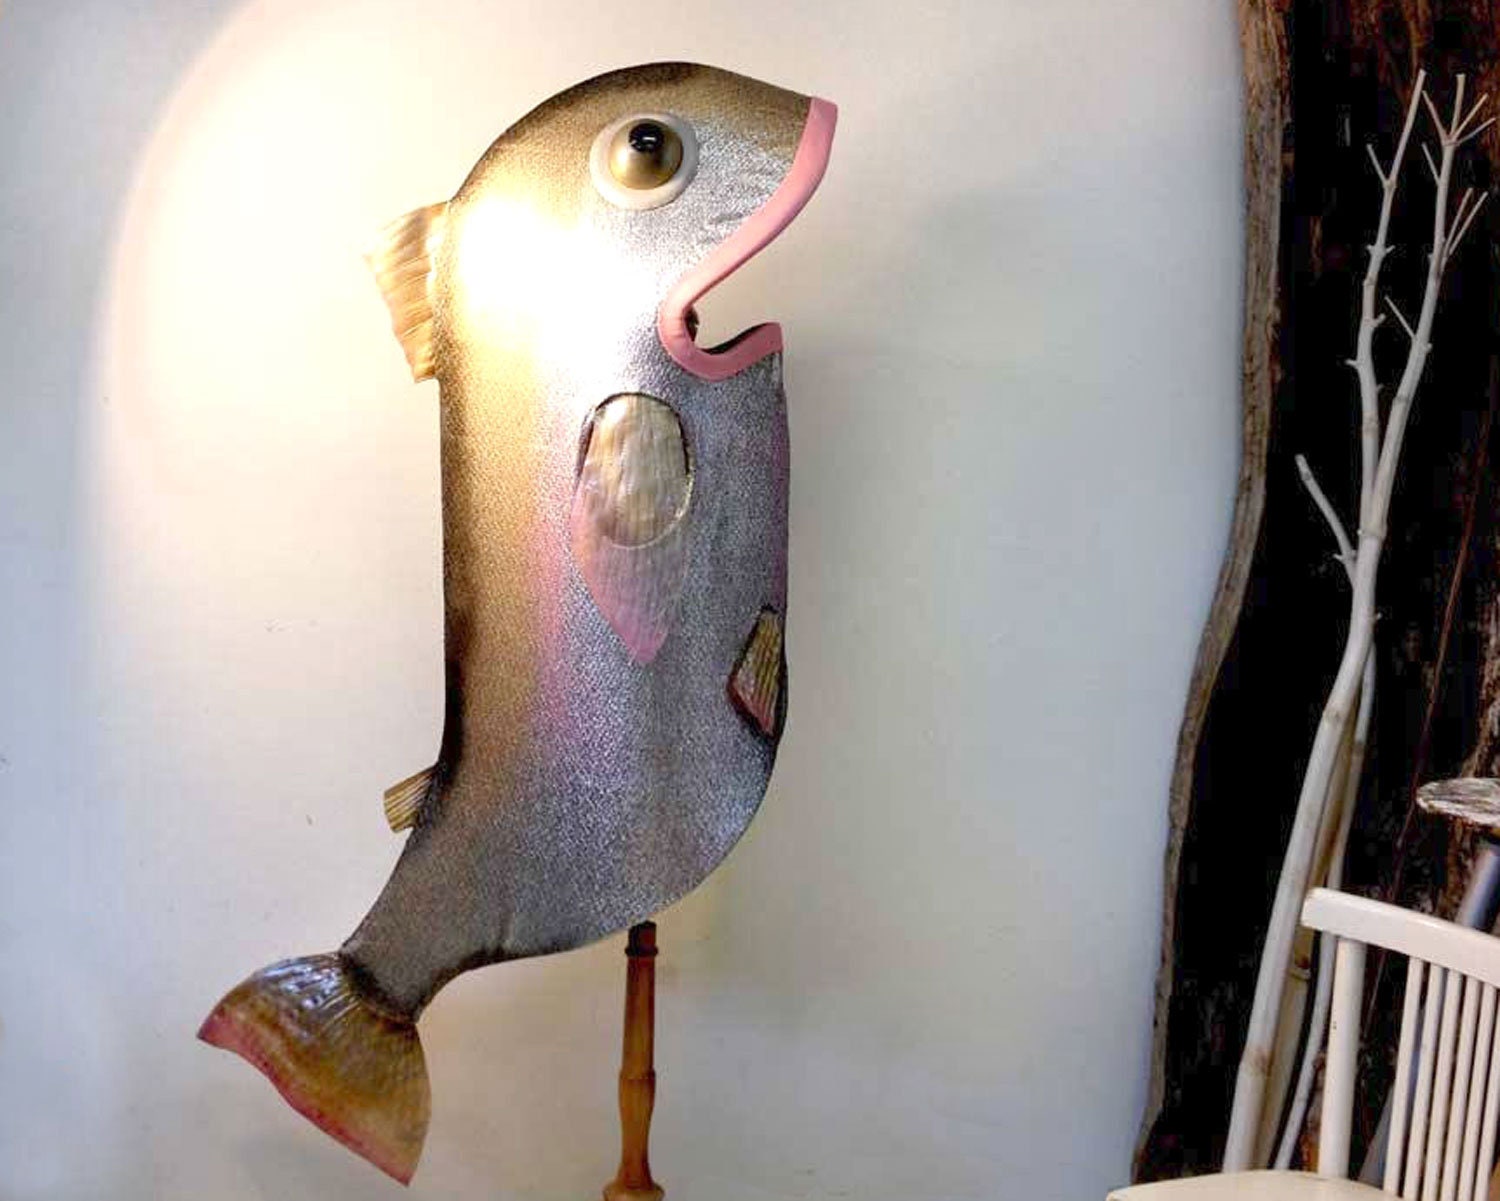 Fish Costume With Holographic Skin Fabric ADULT SIZE Animal Friendly Mascot  Outfit for Women Men Handmade by Tentacle Studio -  Canada